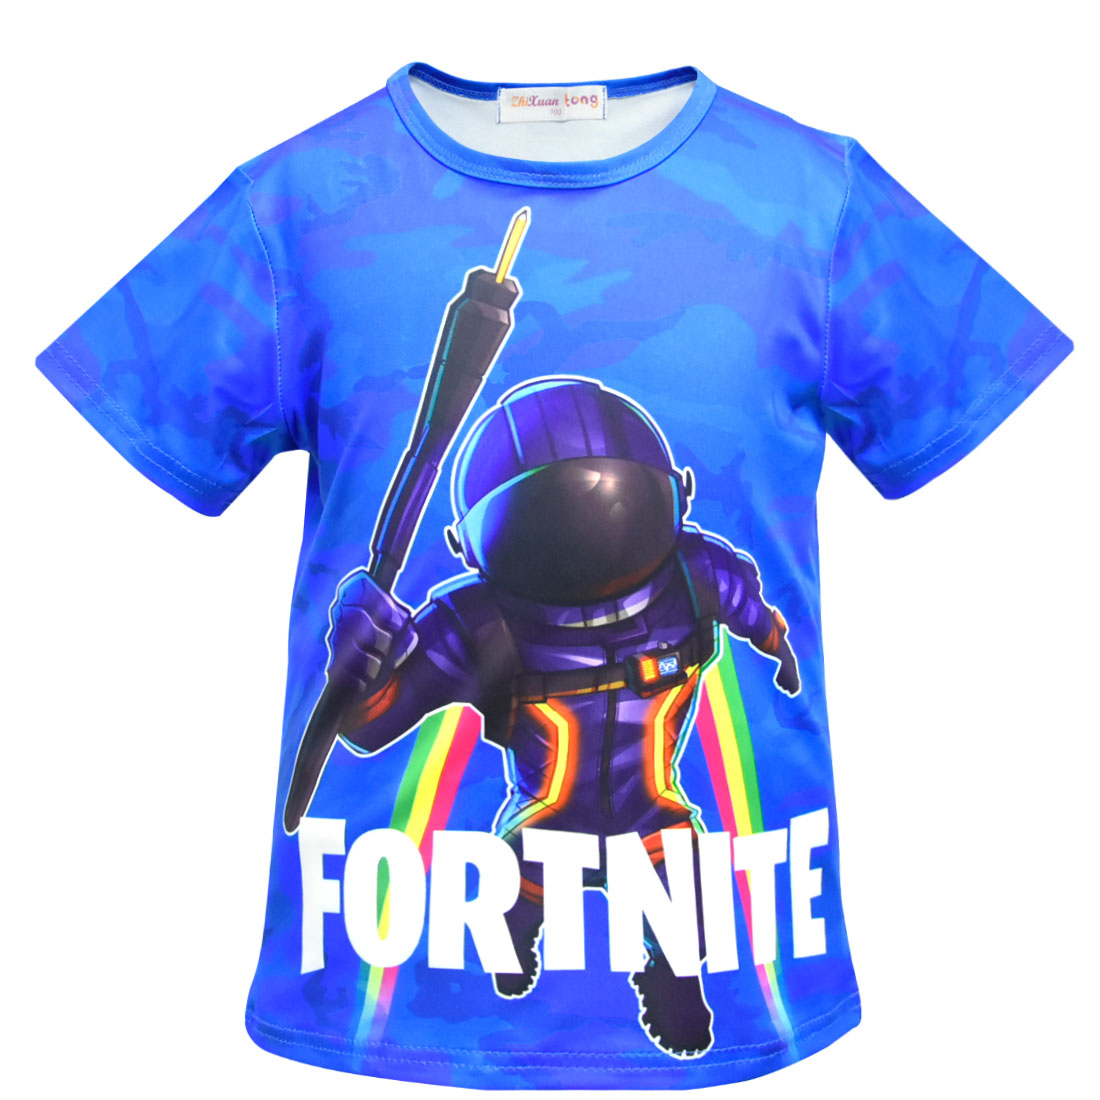 Fortnite clothes shirts and gear for kids Fortnite back to school